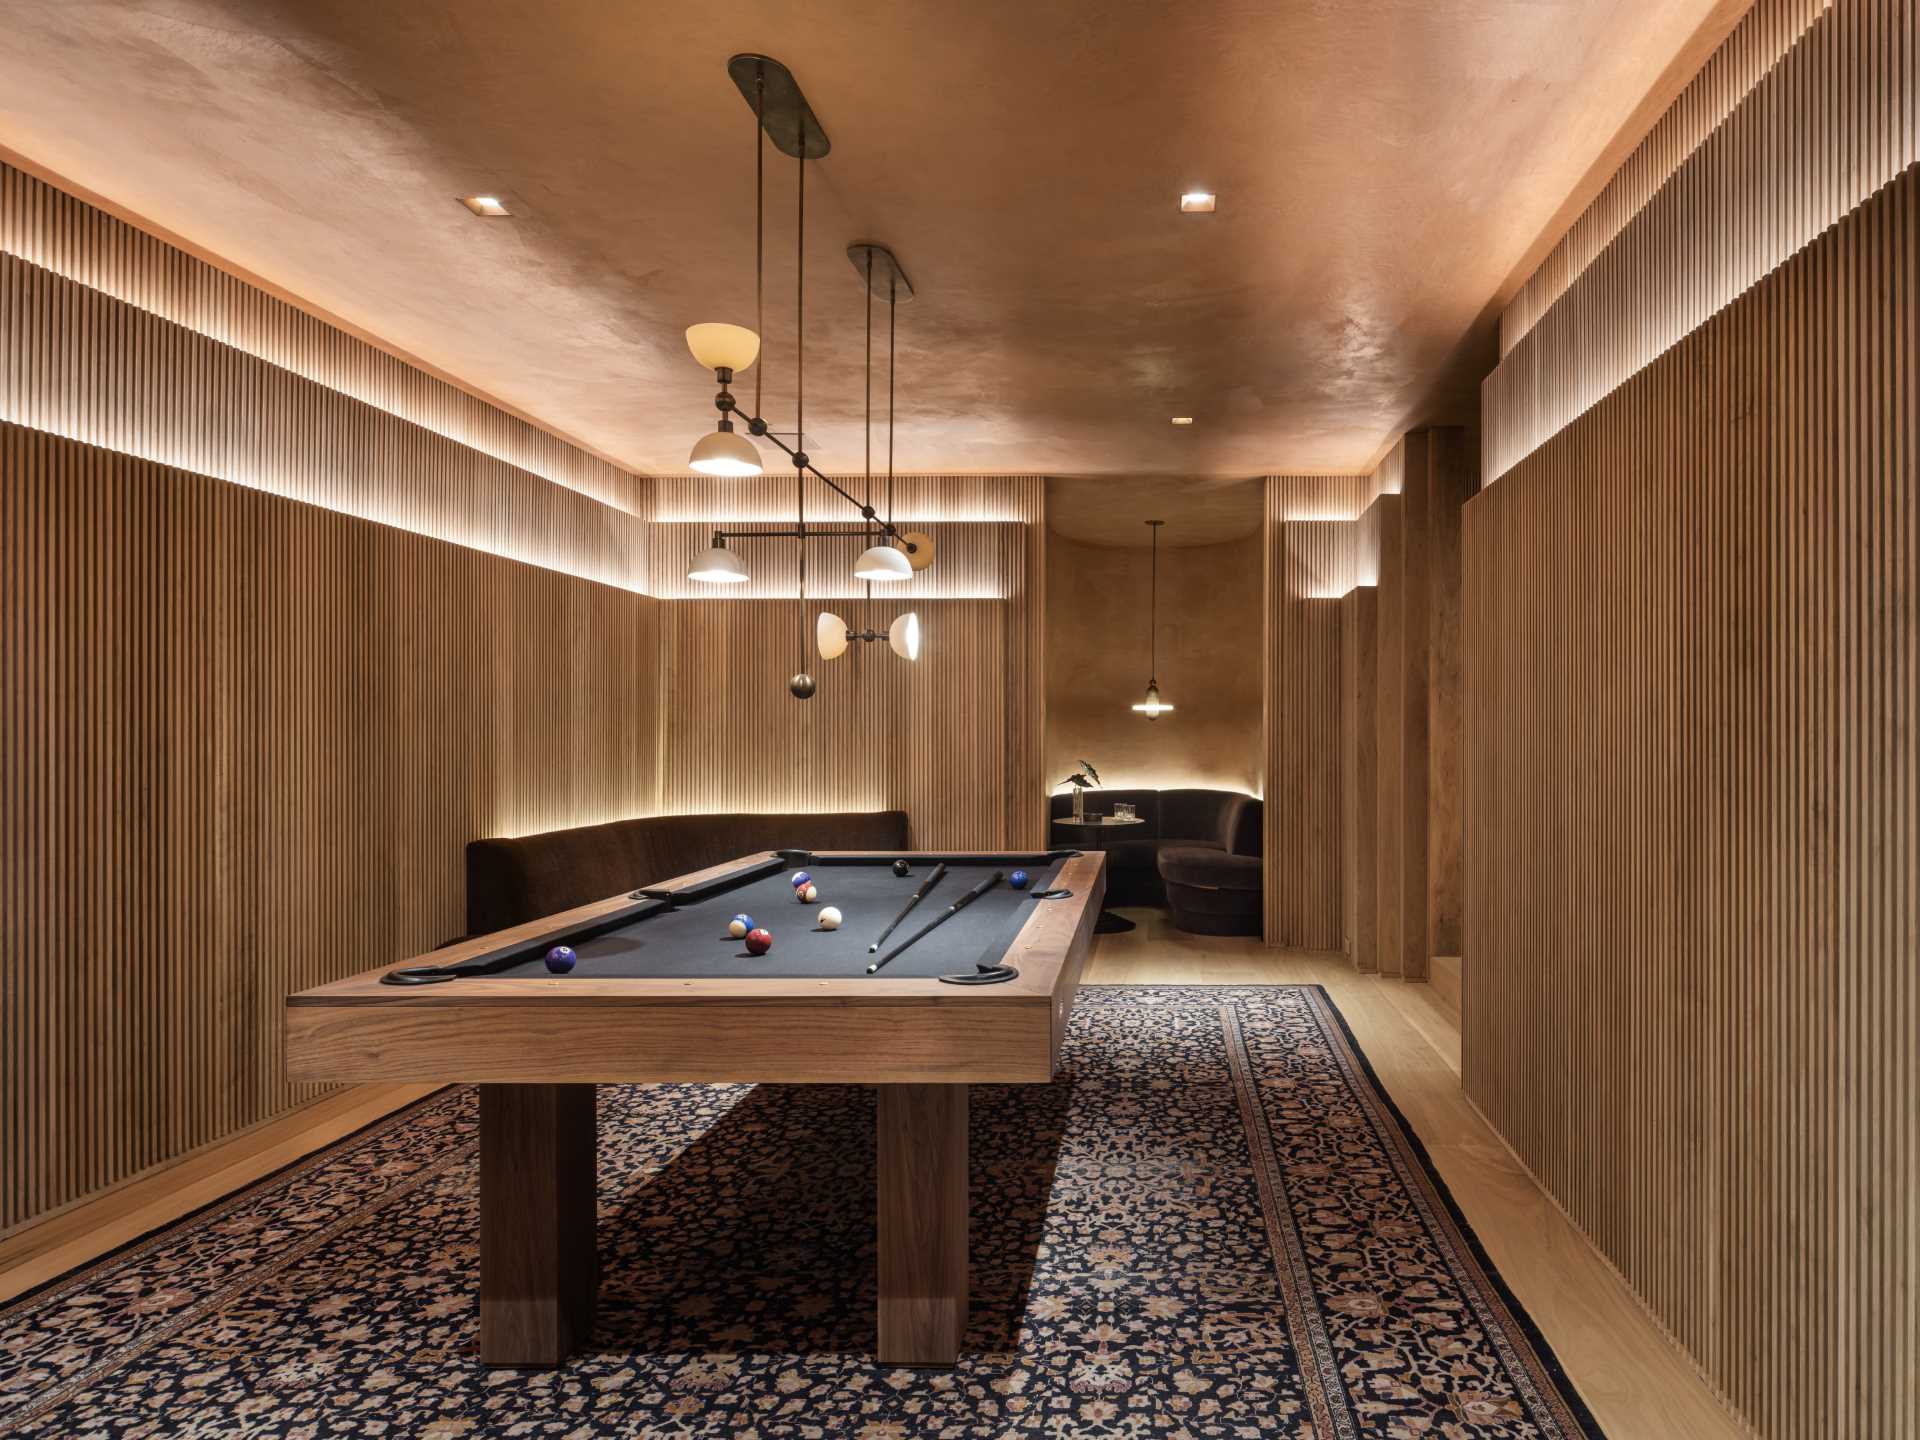 A modern home with a billiards room and seating nook.